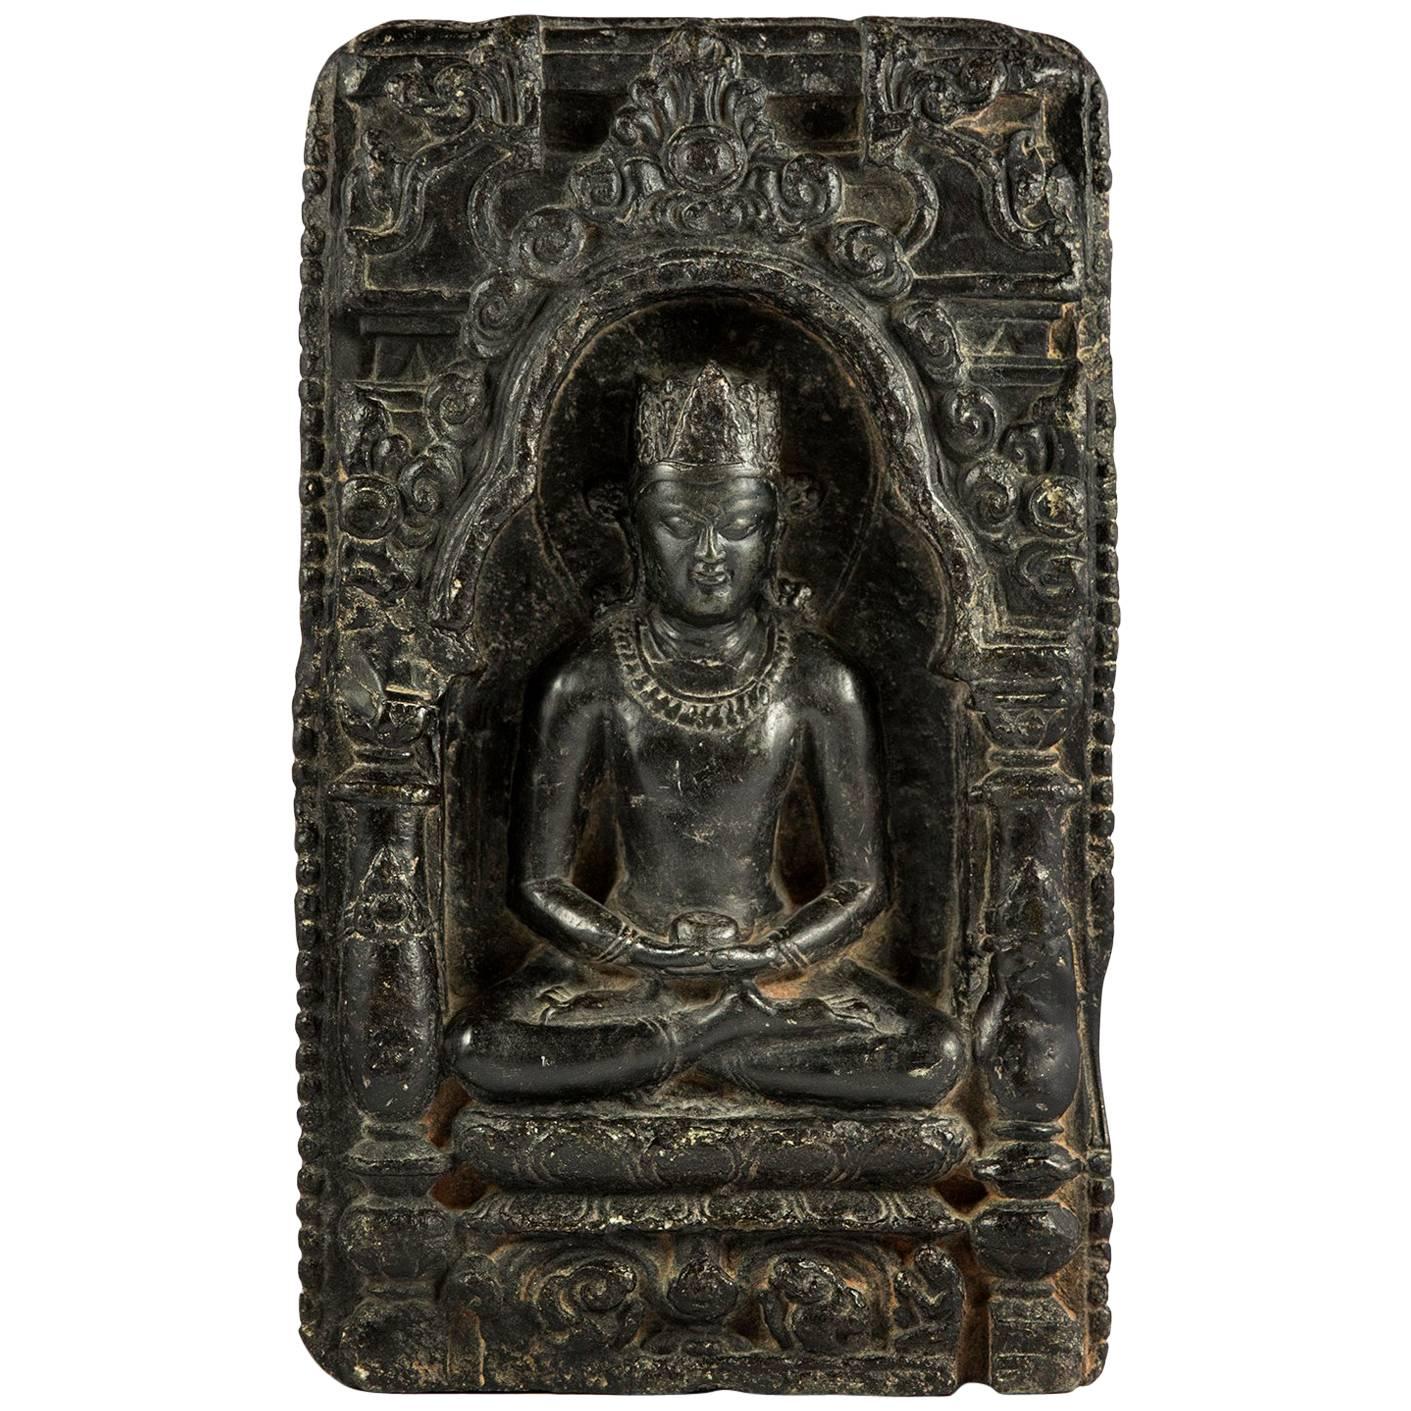 Plate with Buddha. Bengal, Pala - Sena Period 12th Century For Sale